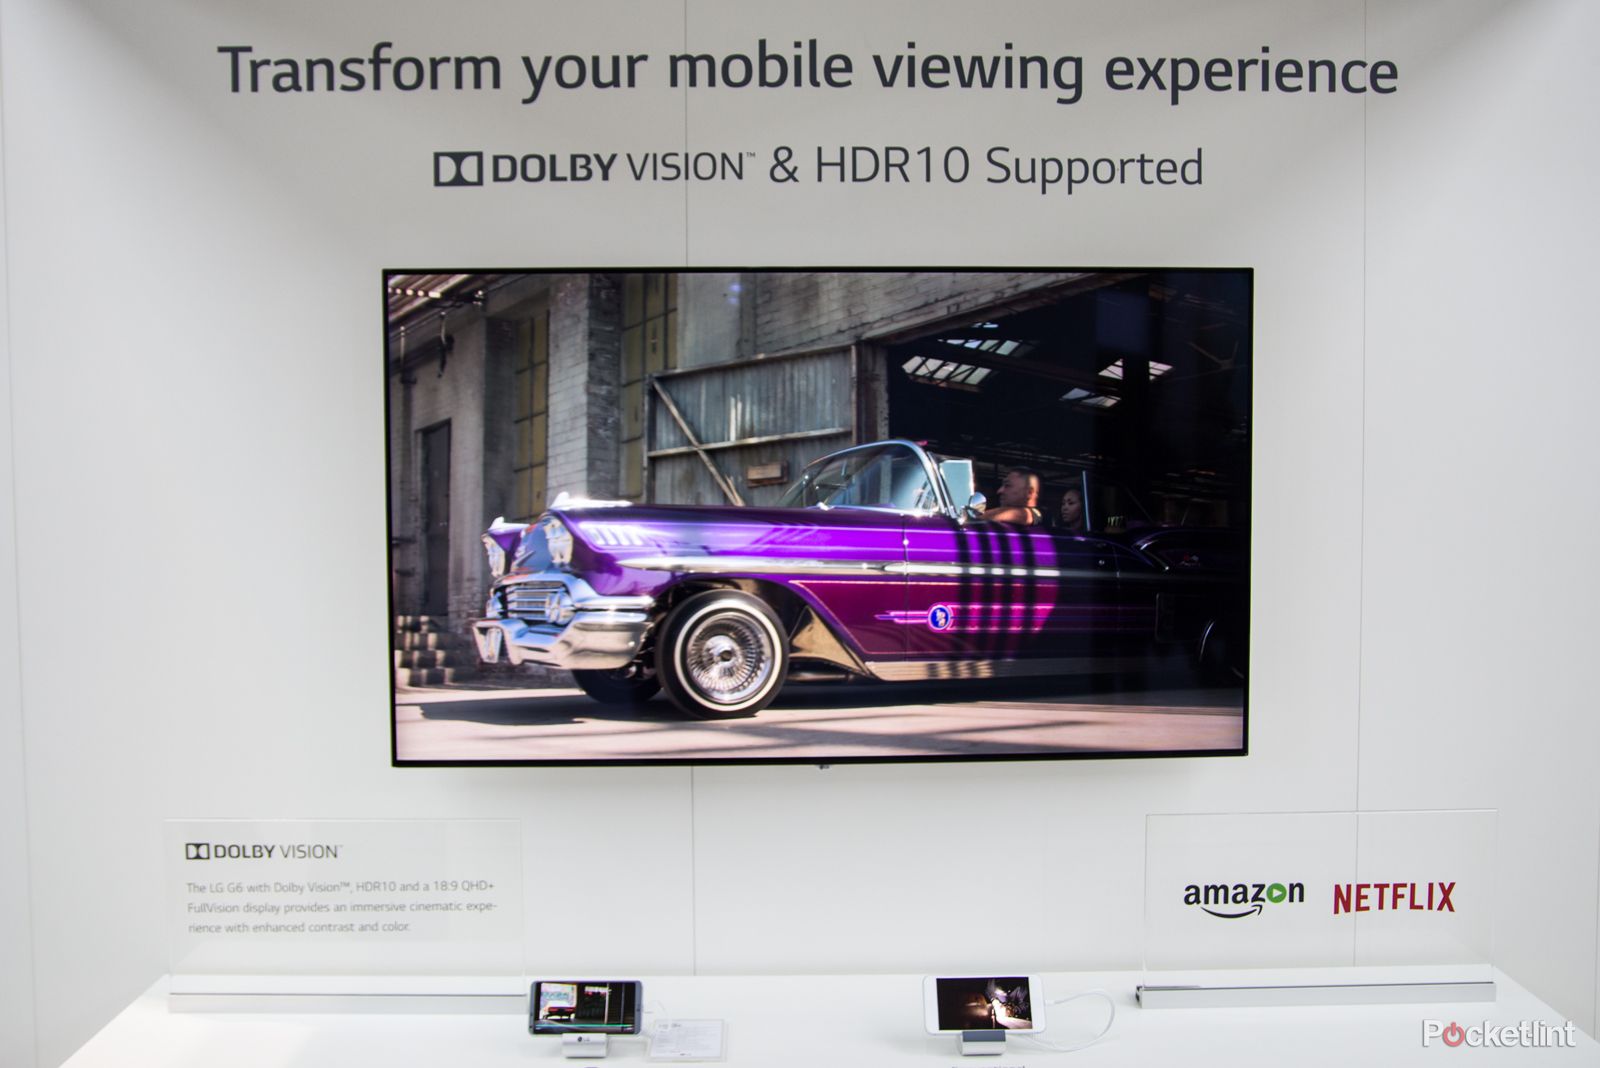 mobile hdr dolby vision hdr10 and mobile hdr premium explained image 1